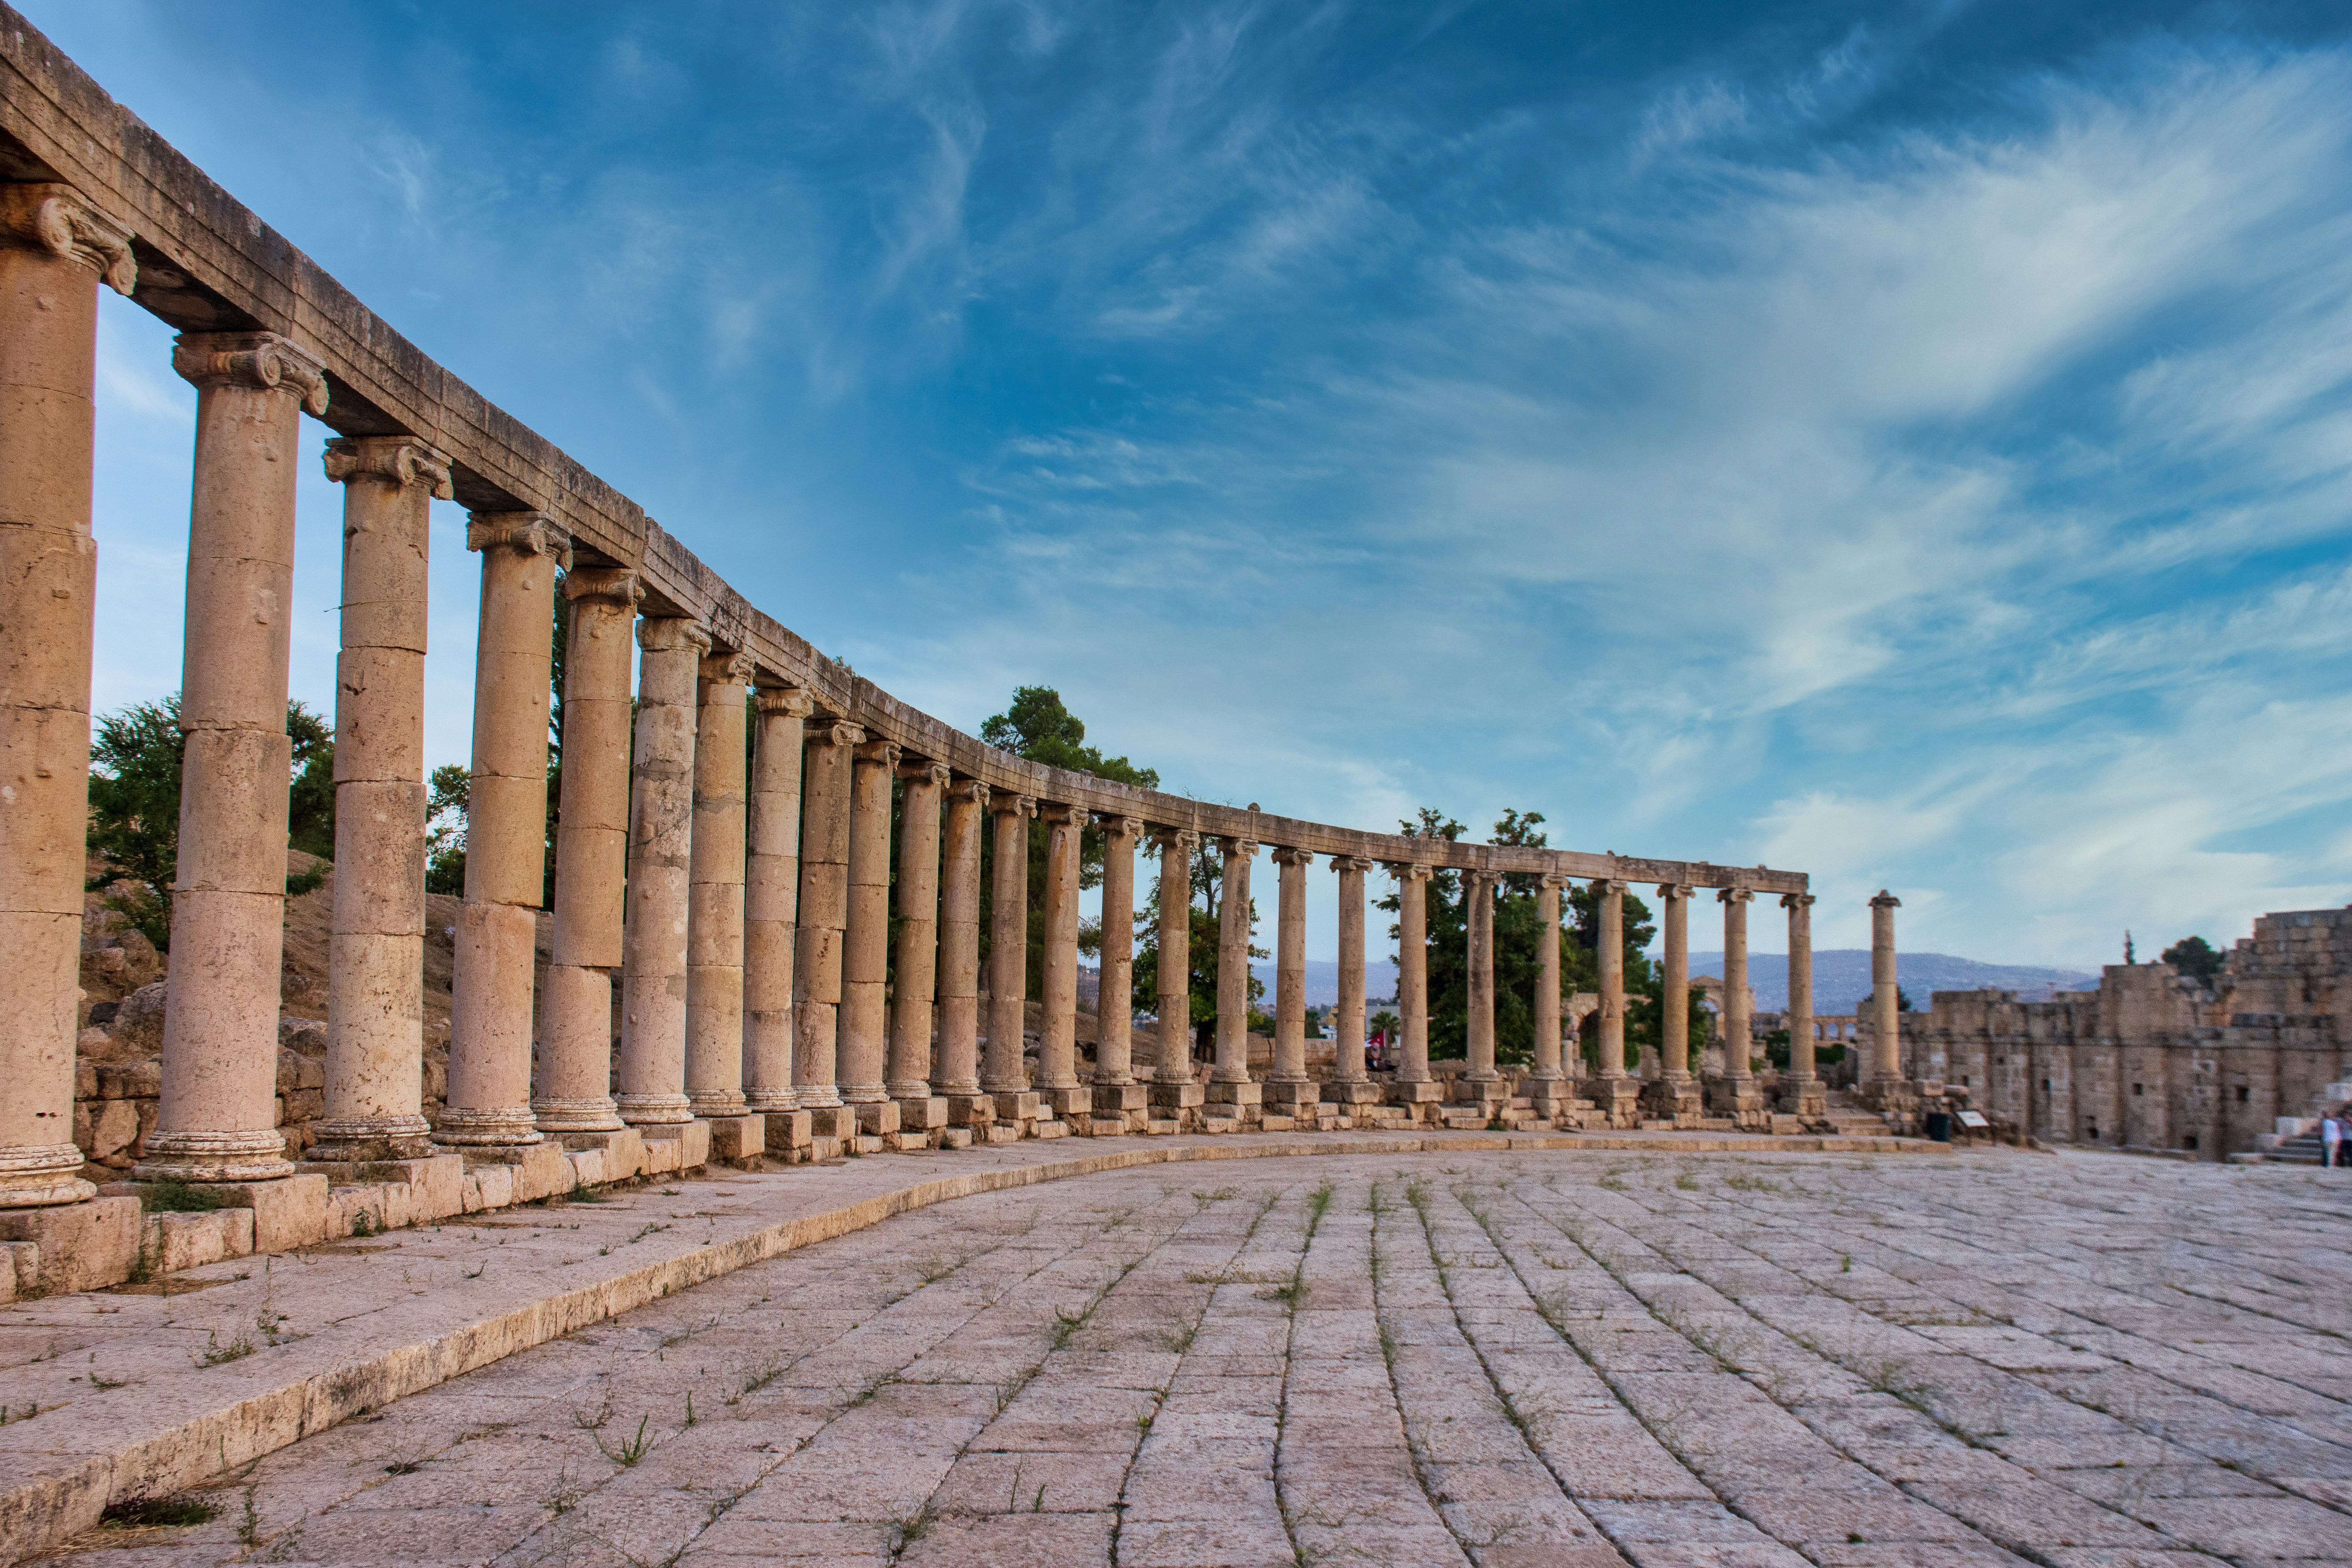 The ruins in Jerash are one of those legacies. Complete with arches, colonnades, hippodrome, baths, theaters, temples, and more, Jerash is the most well-preserved of Jordan’s Greco-Roman sites.